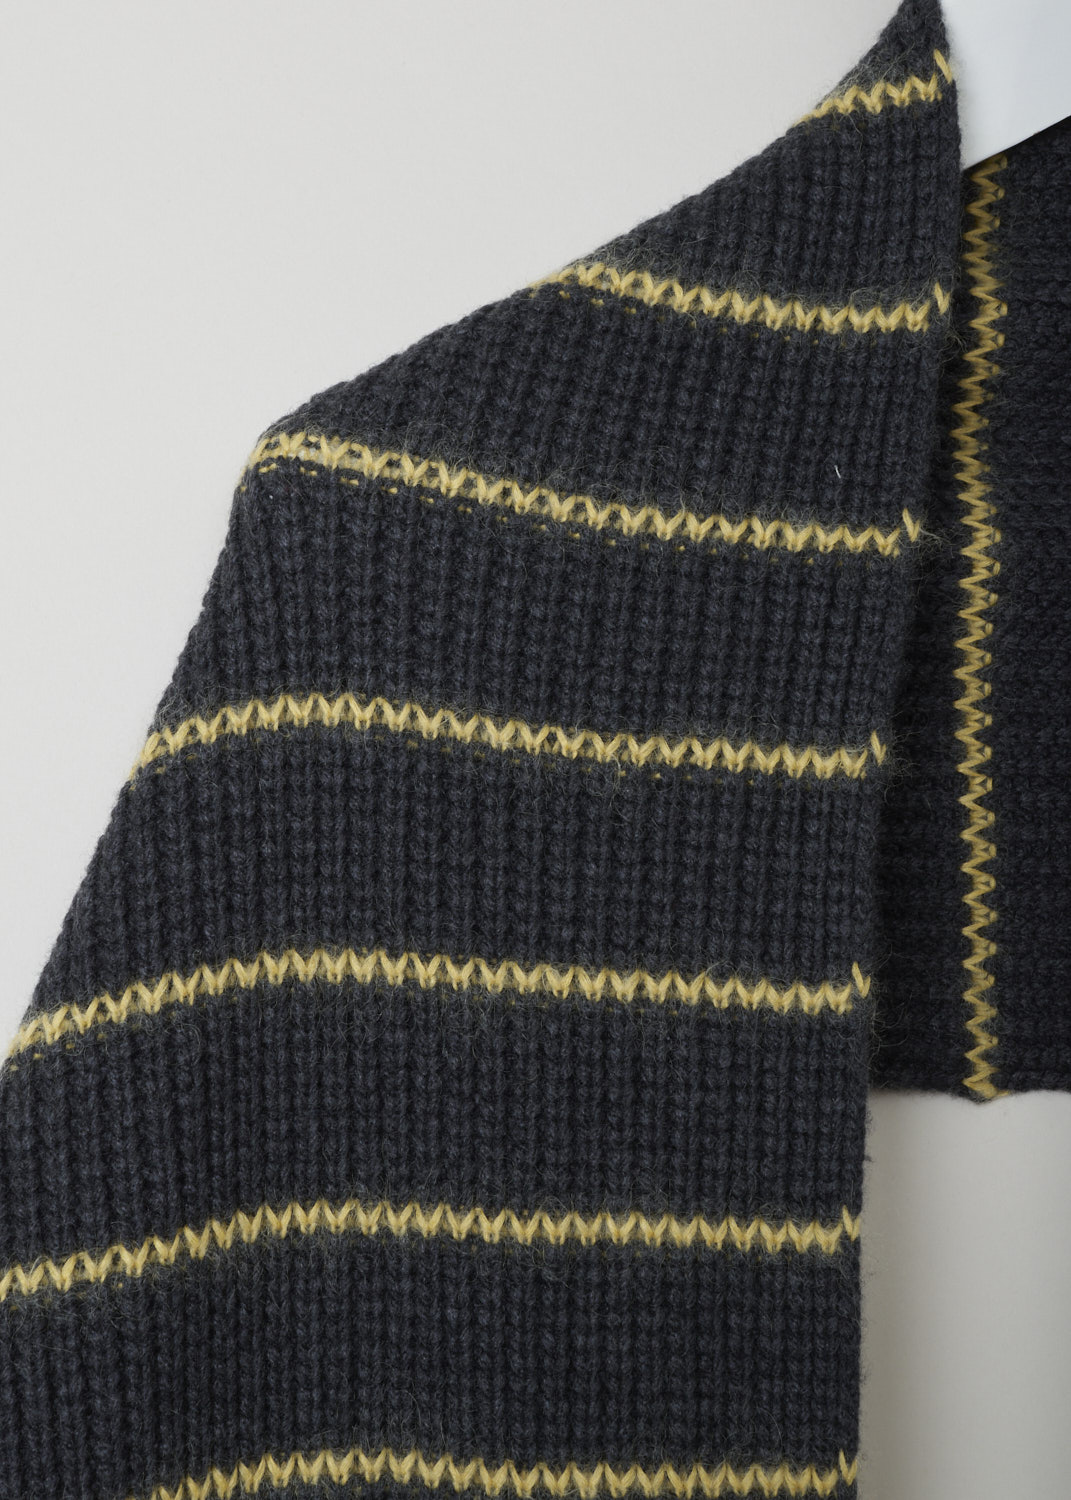 Brunello Cucinelli, Charcoal cashmere shawl, M52528499_CM723, grey yellow, detail,  Knitted cashmere shawl with the characteristic softness of Brunello Cucinelli. Comes in a two tone colour theme, being a charcoal grey and a lovely shade of yellow. 

Shawl length: 240 cm / 94.4 inch.